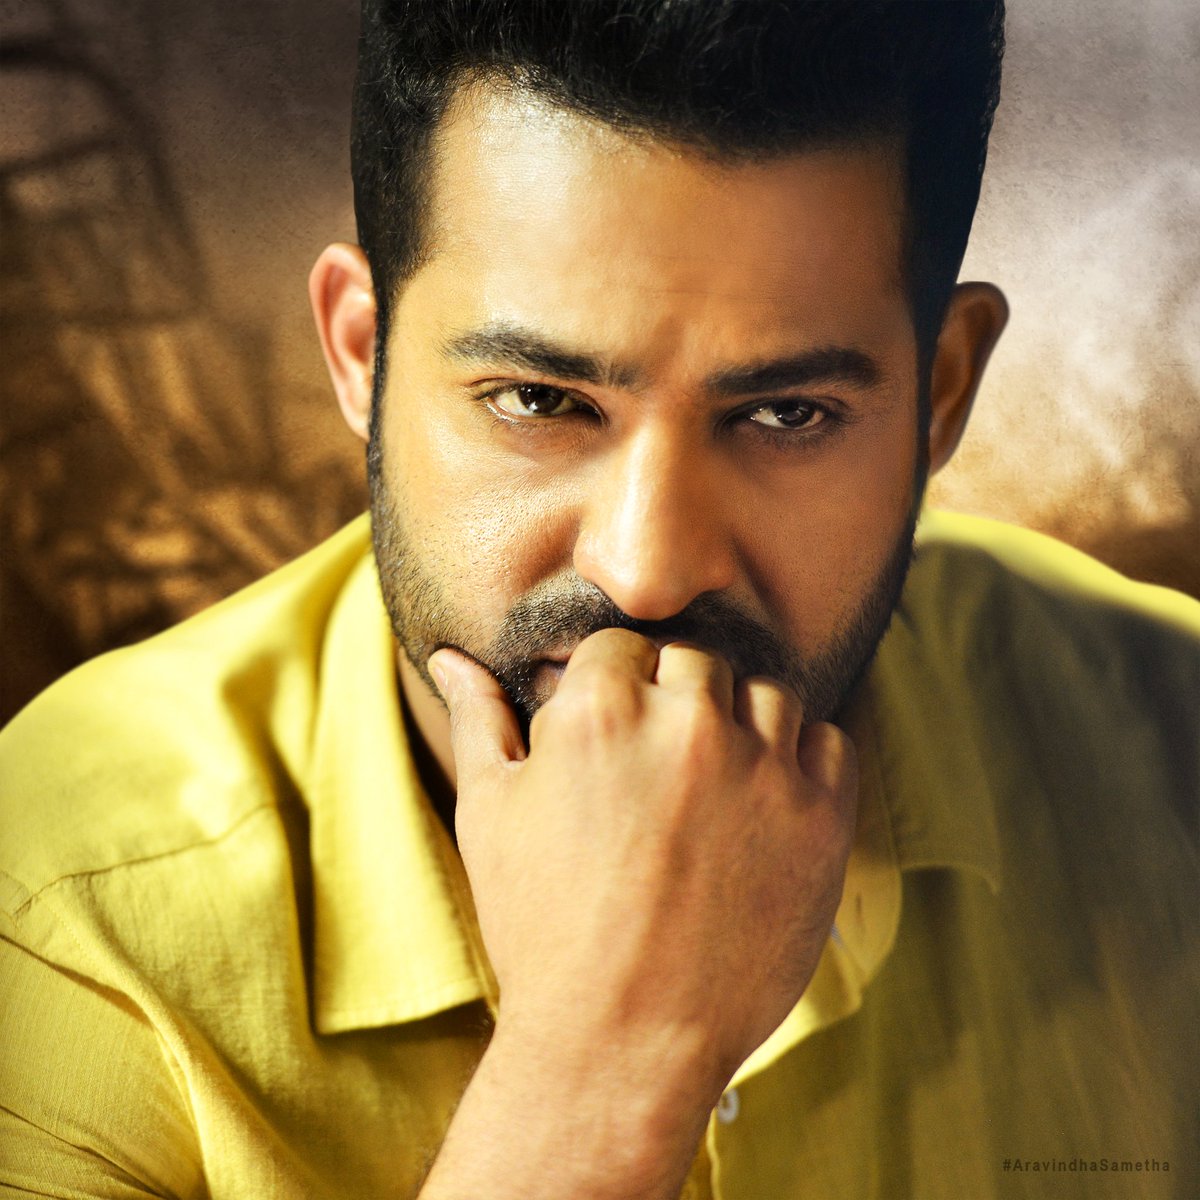 The world just started seeing what's present deep under the Iceberg named NTR. Here's to many more revelations and laurels. Wishing my tiger @tarak9999 a very happy birthday.  Onwards & Upwards 📈 

#HappyBirthdayNTR